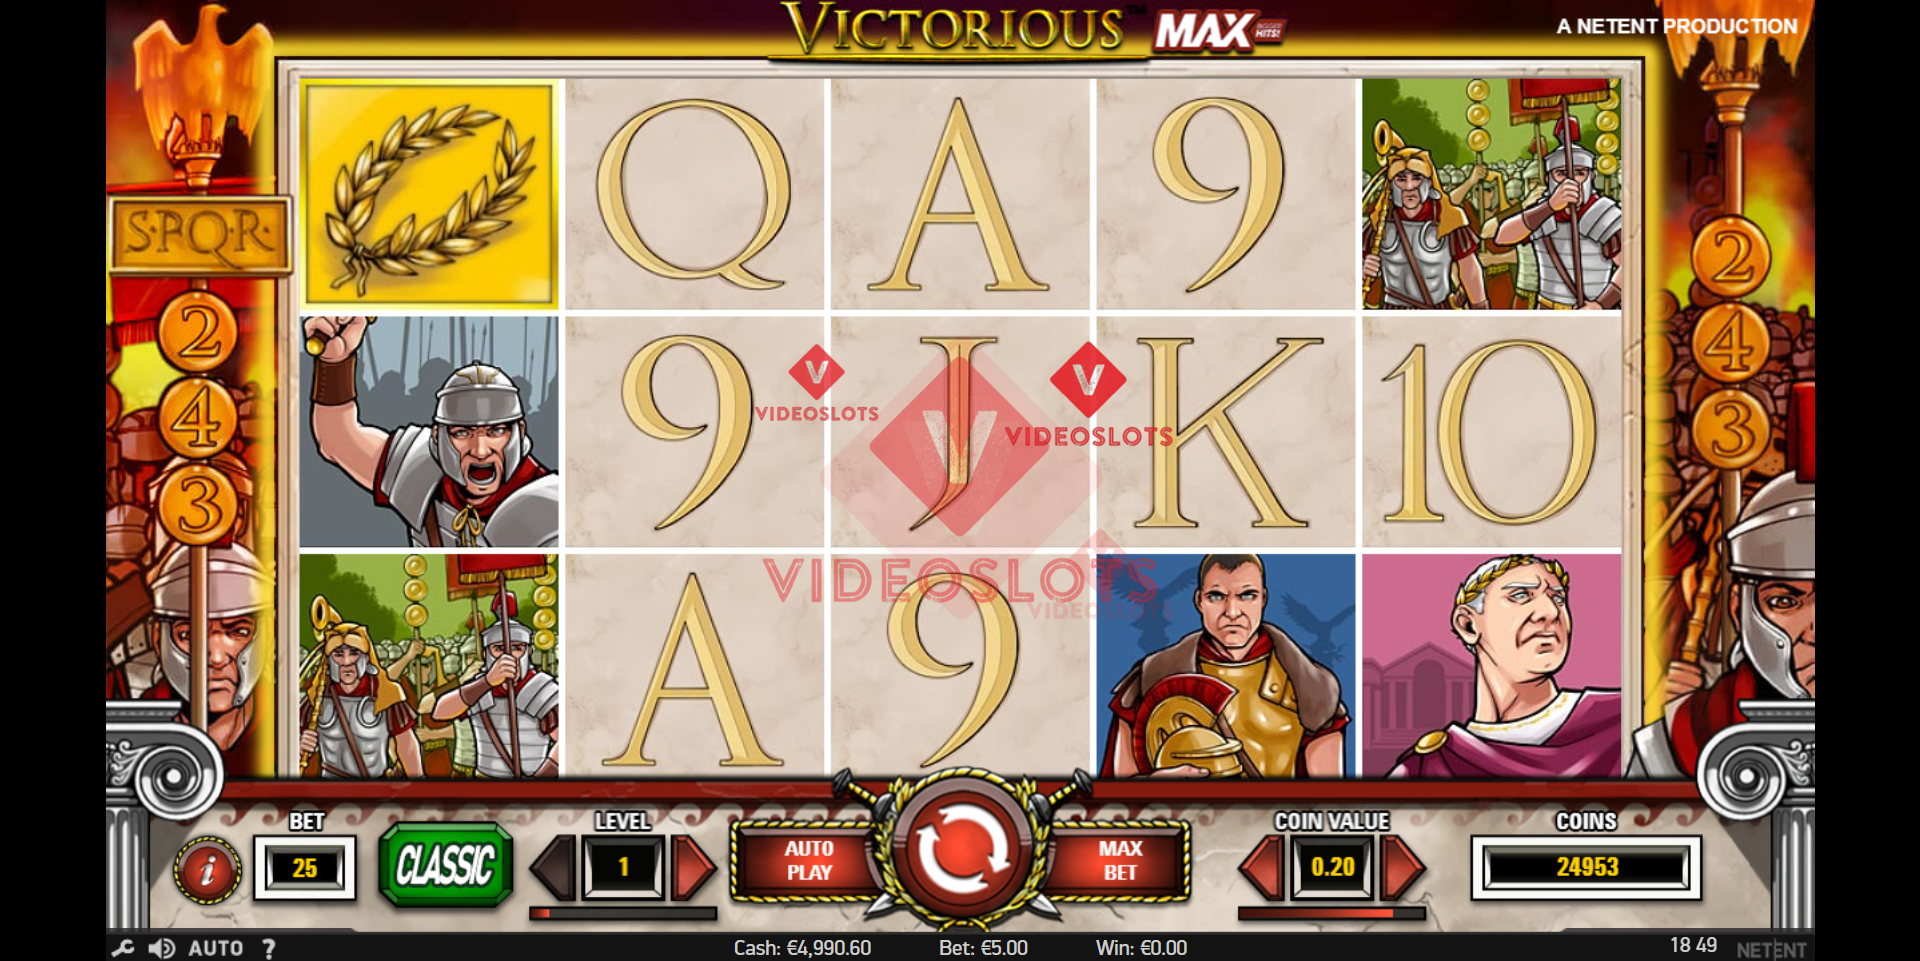 Base Game for Victorious MAX slot from NetEnt